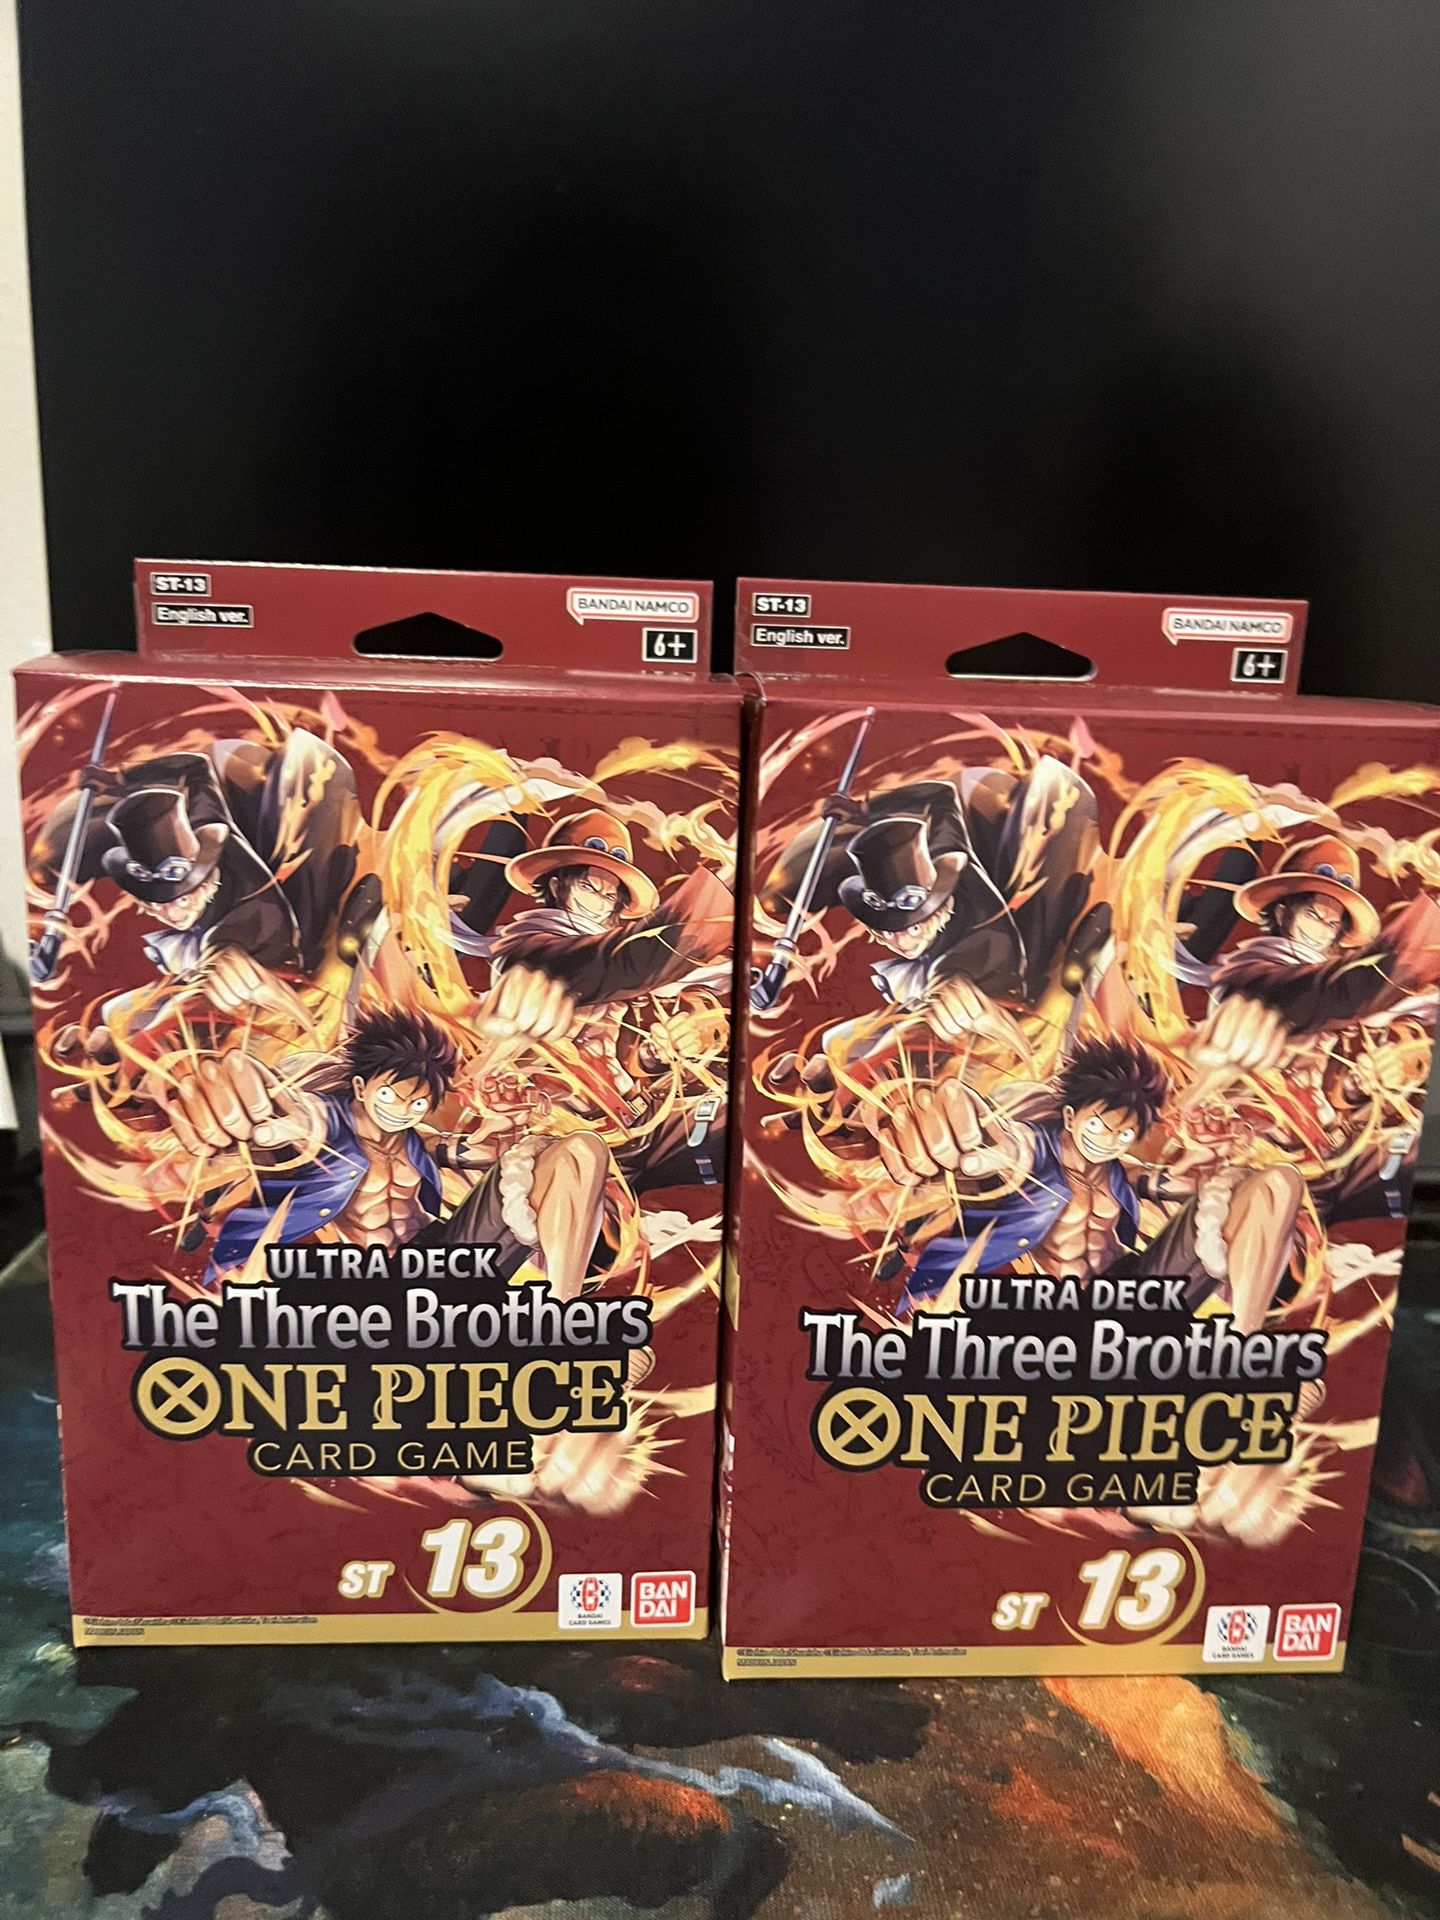 One Piece Card Game Three Brothers ST 13 Deck - No Pack